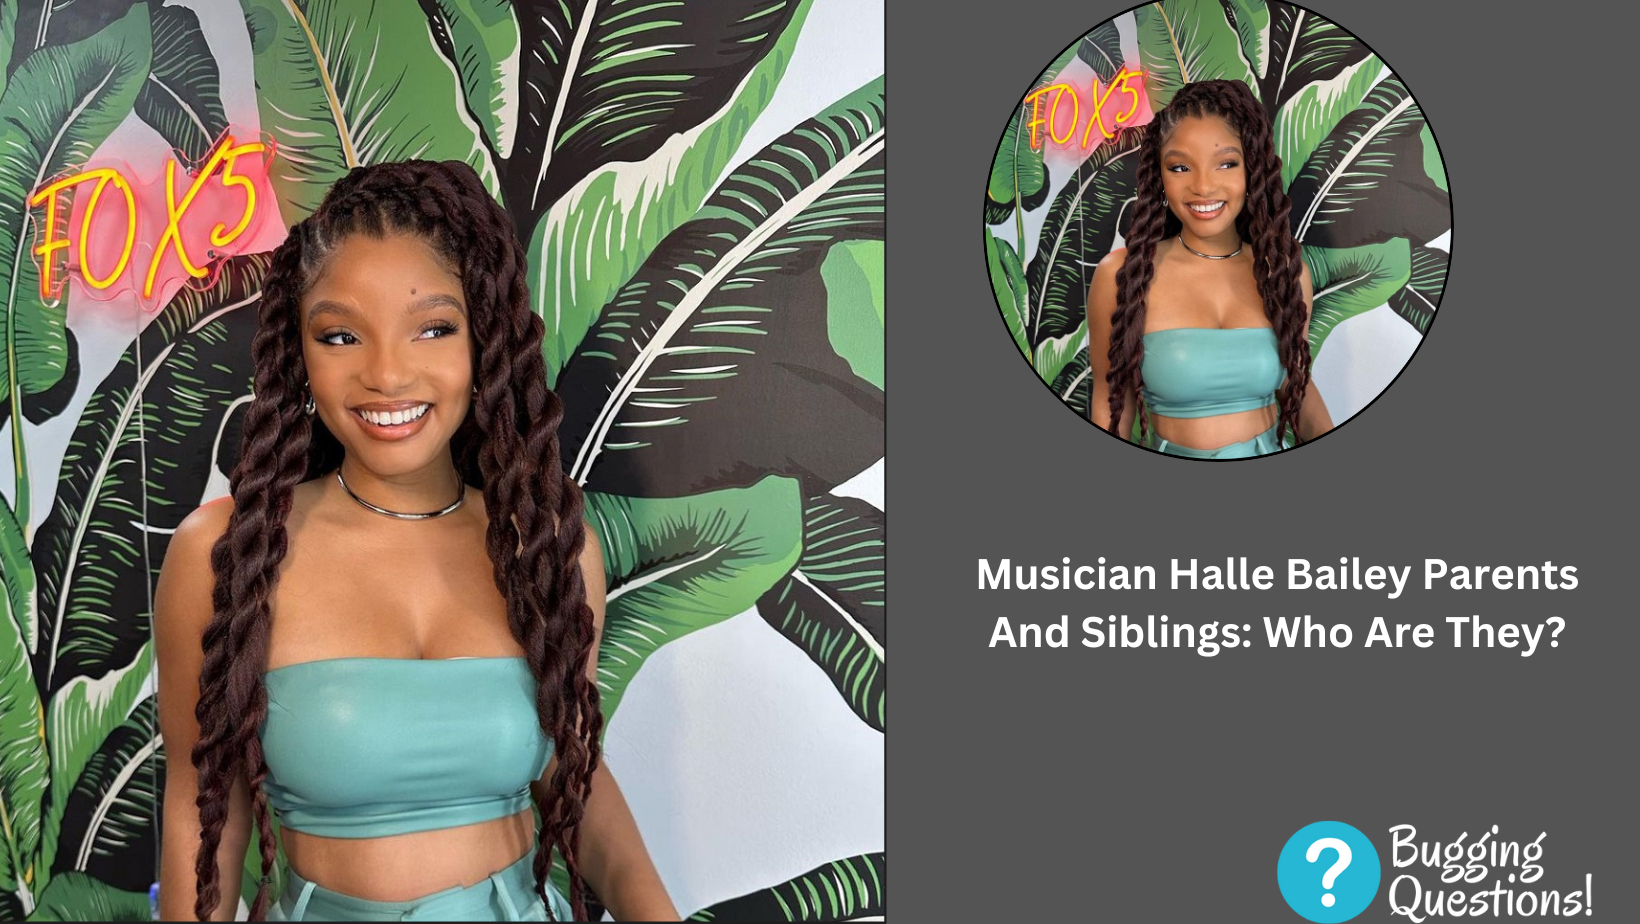 Musician Halle Bailey Parents And Siblings: